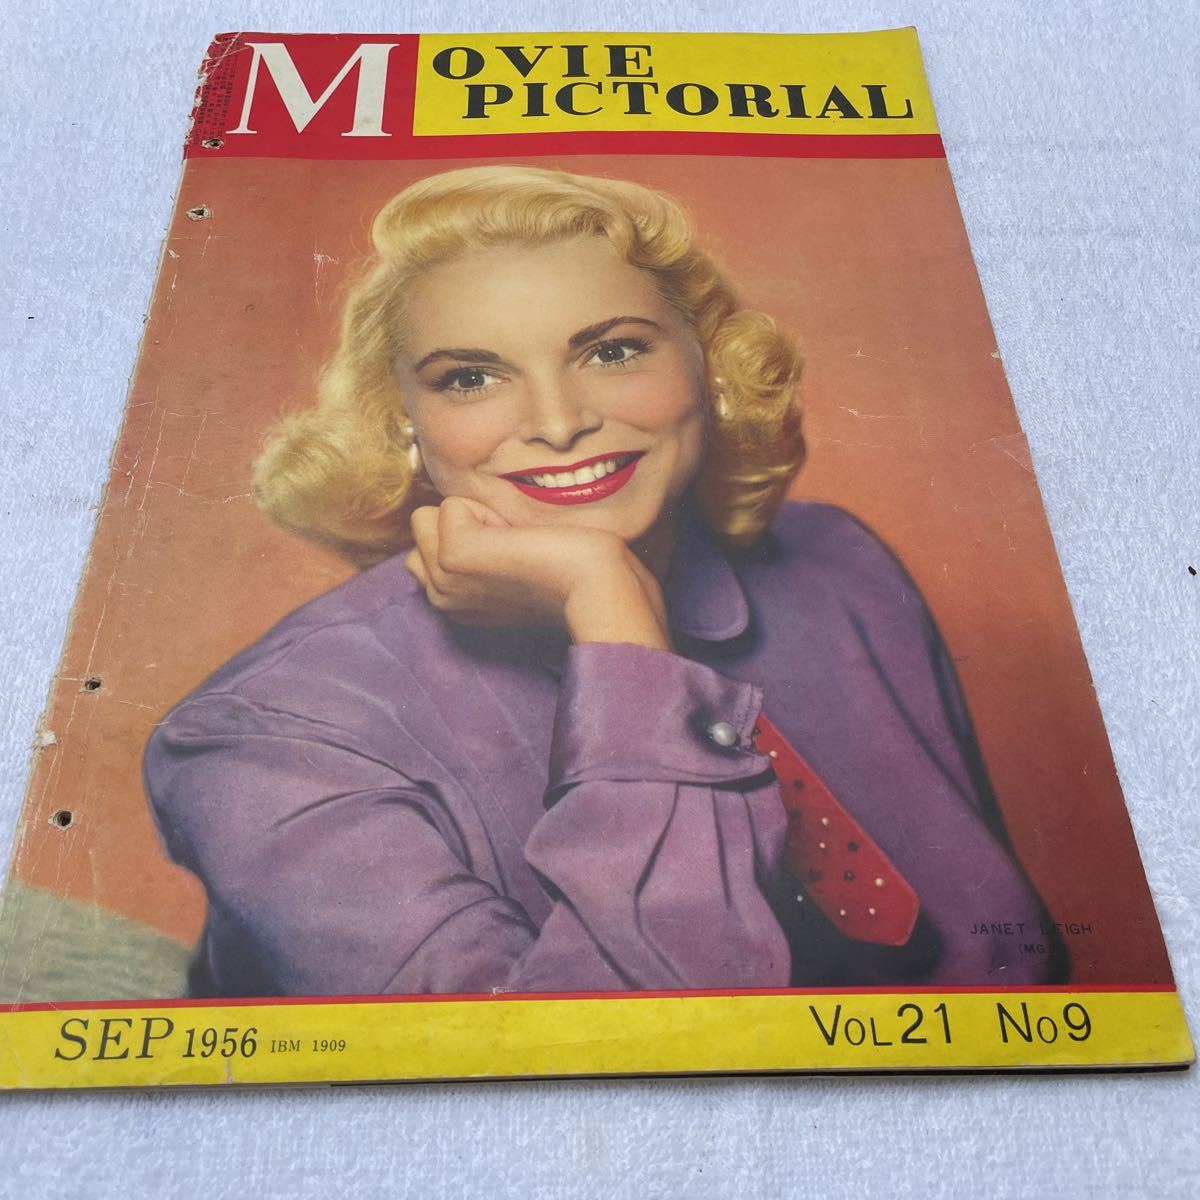  movie information 1956 year 9 month international information company Aoyama capital ./ Marilyn Monroe other 